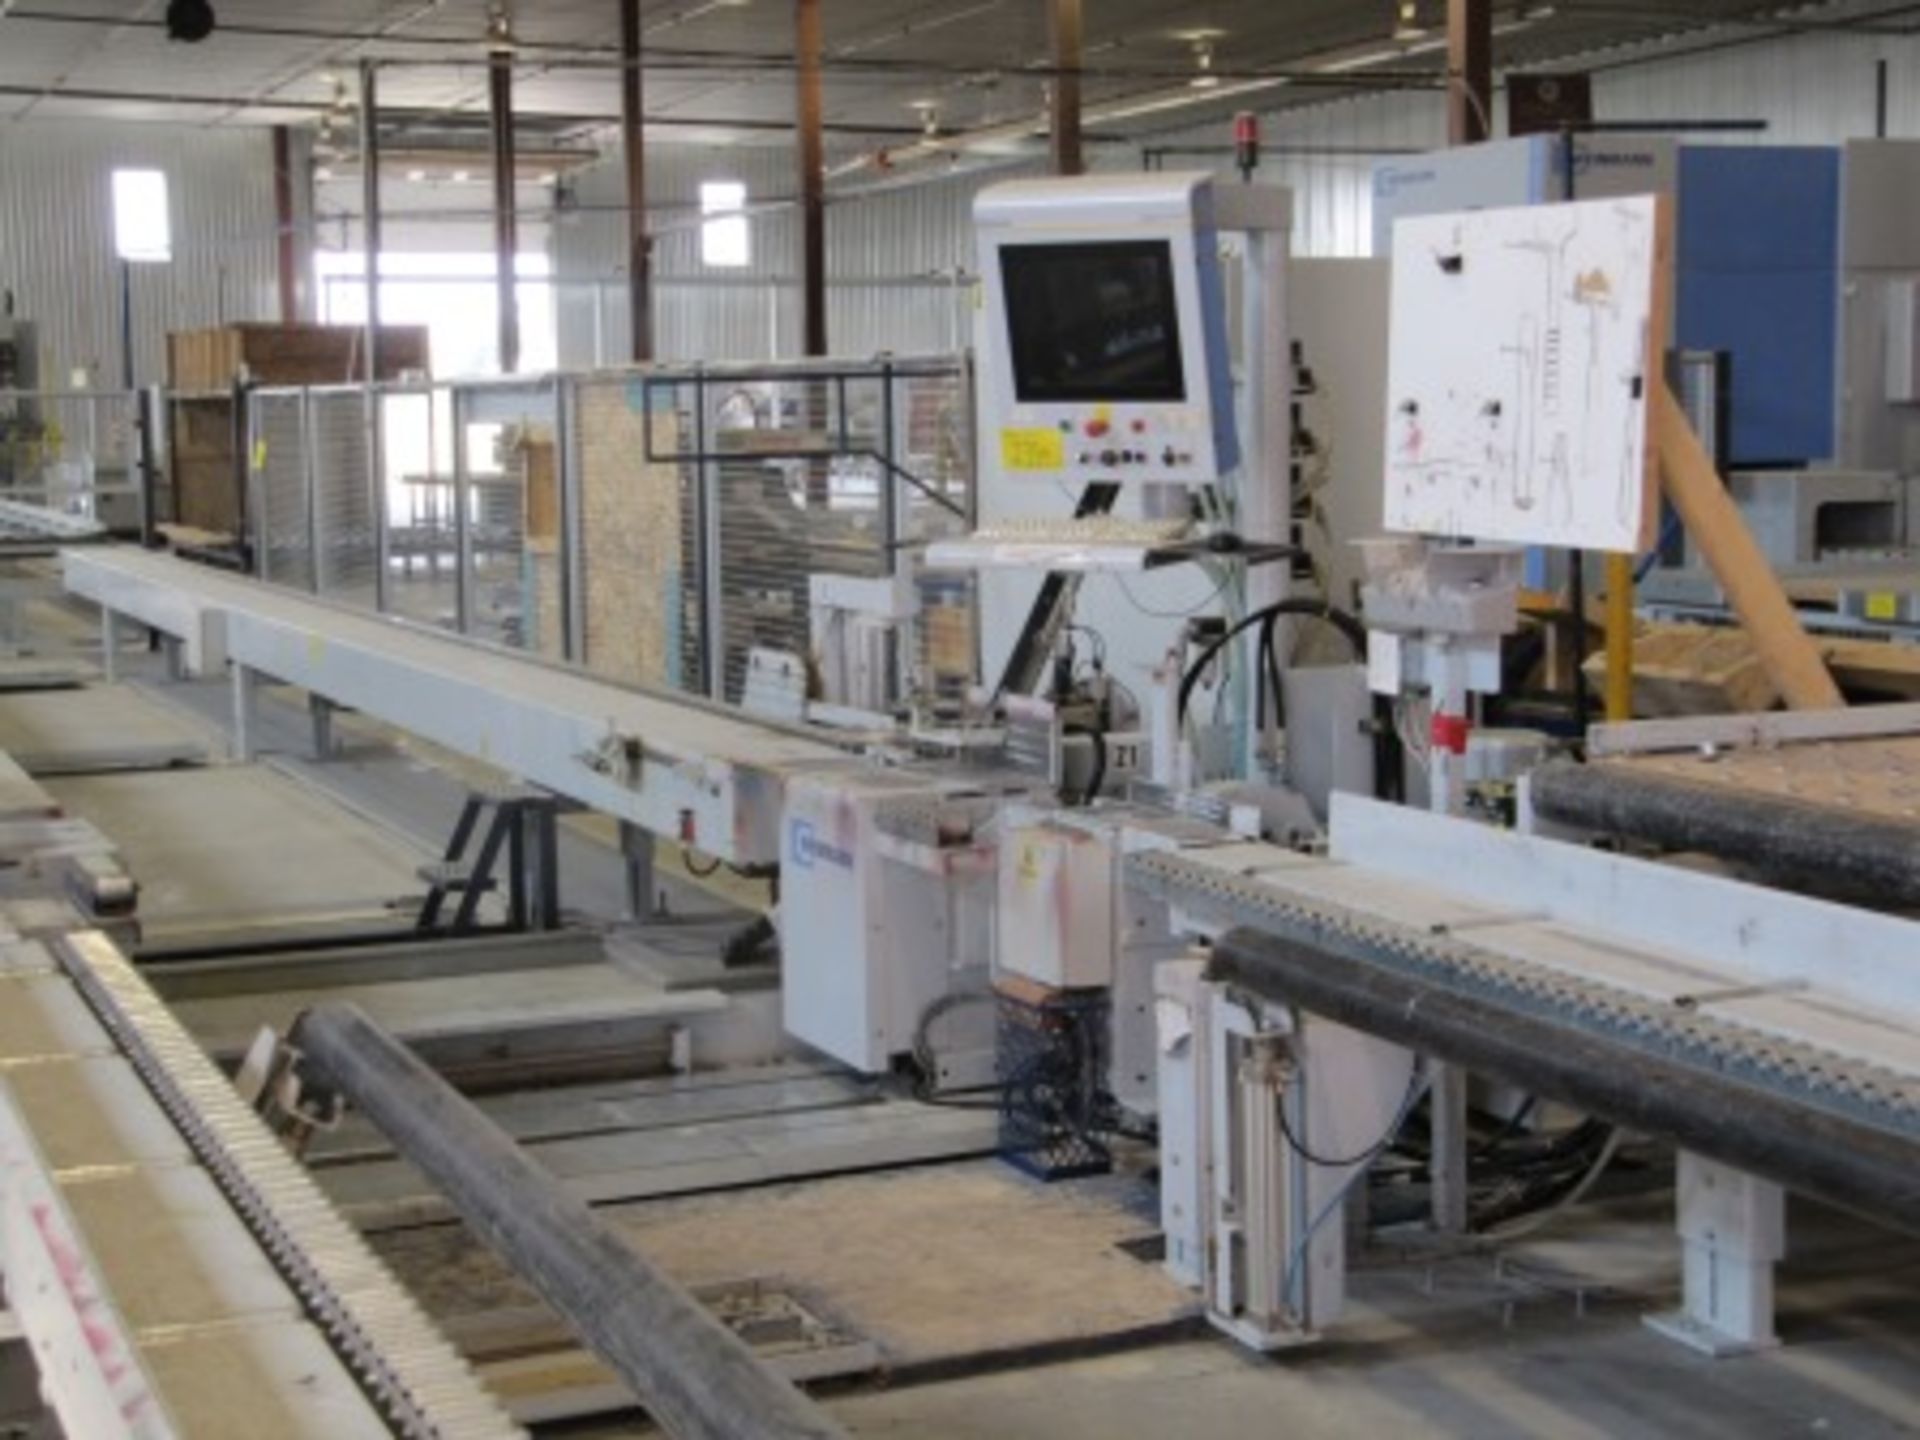 2008 WEINMANN Framing Station, Model WEM 150/12,  In/Out Feed Conveyors   S/N 0-396-14-0026